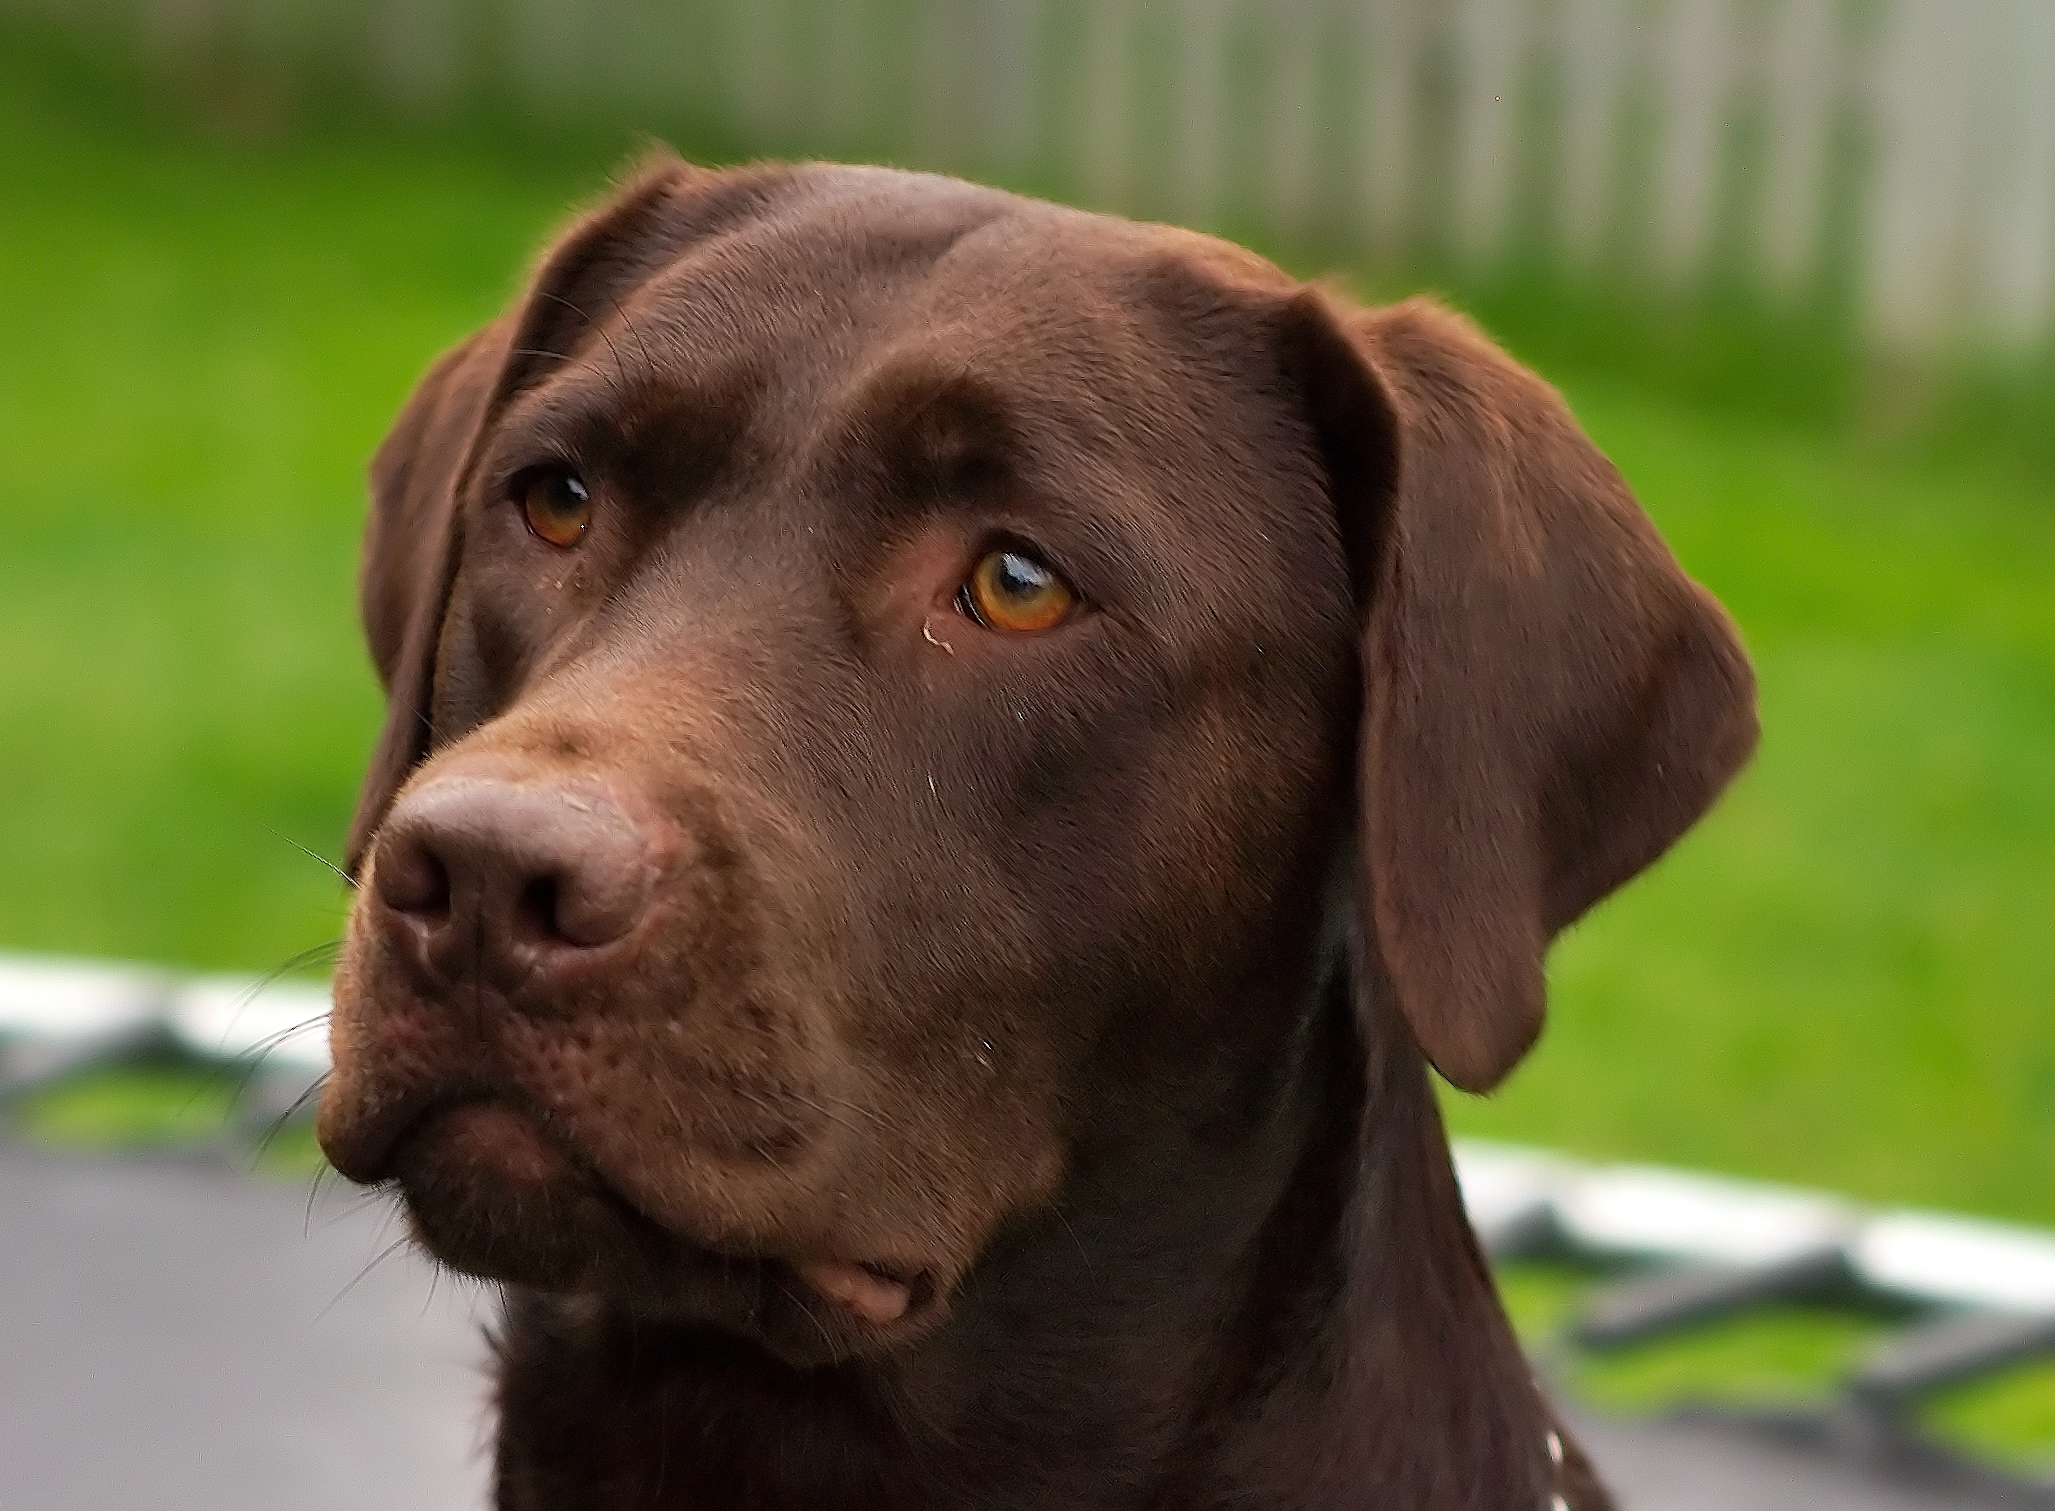 25 Wonderful Chocolate Labrador Retriever Dog Pictures And Images